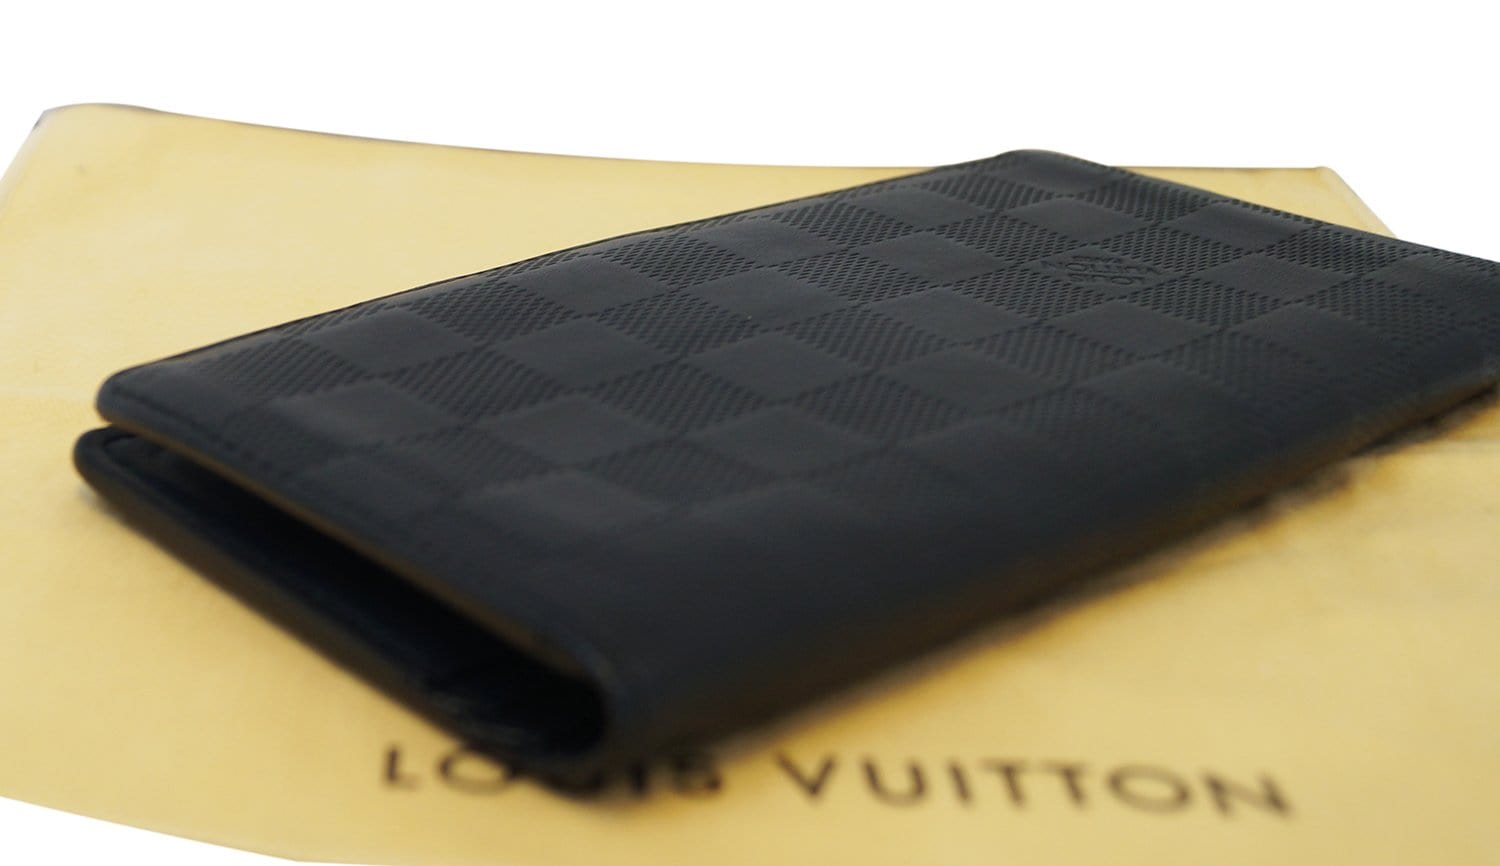 Louis Vuitton Damier Infini Navy Blue Leather Wallet – The Don's Luxury  Goods